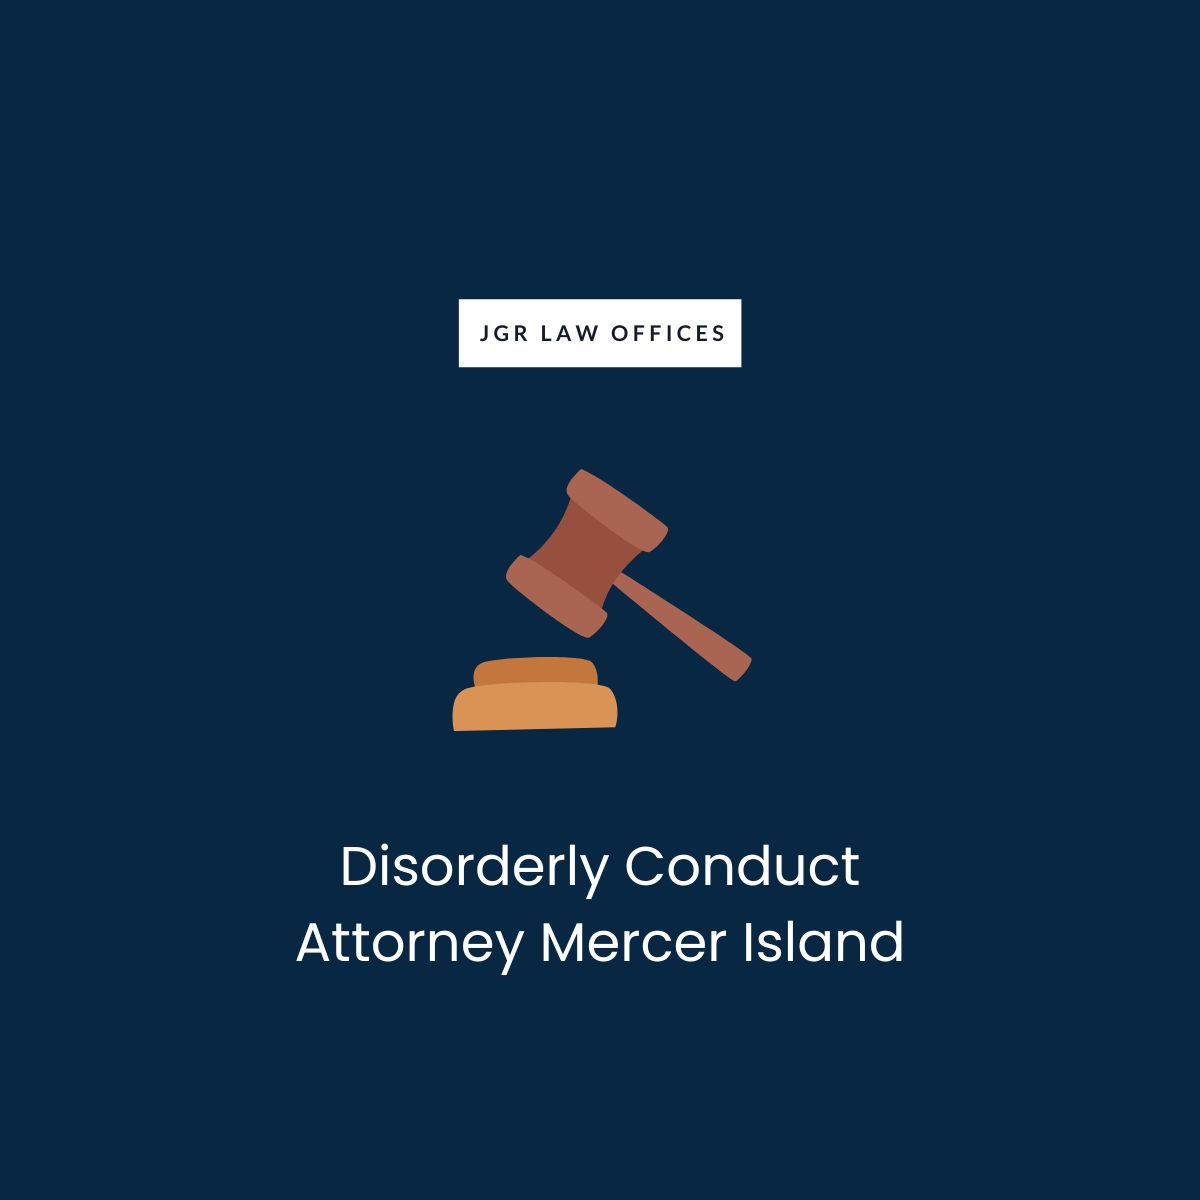 Disorderly Conduct Lawyer Mercer Island Disorderly Conduct